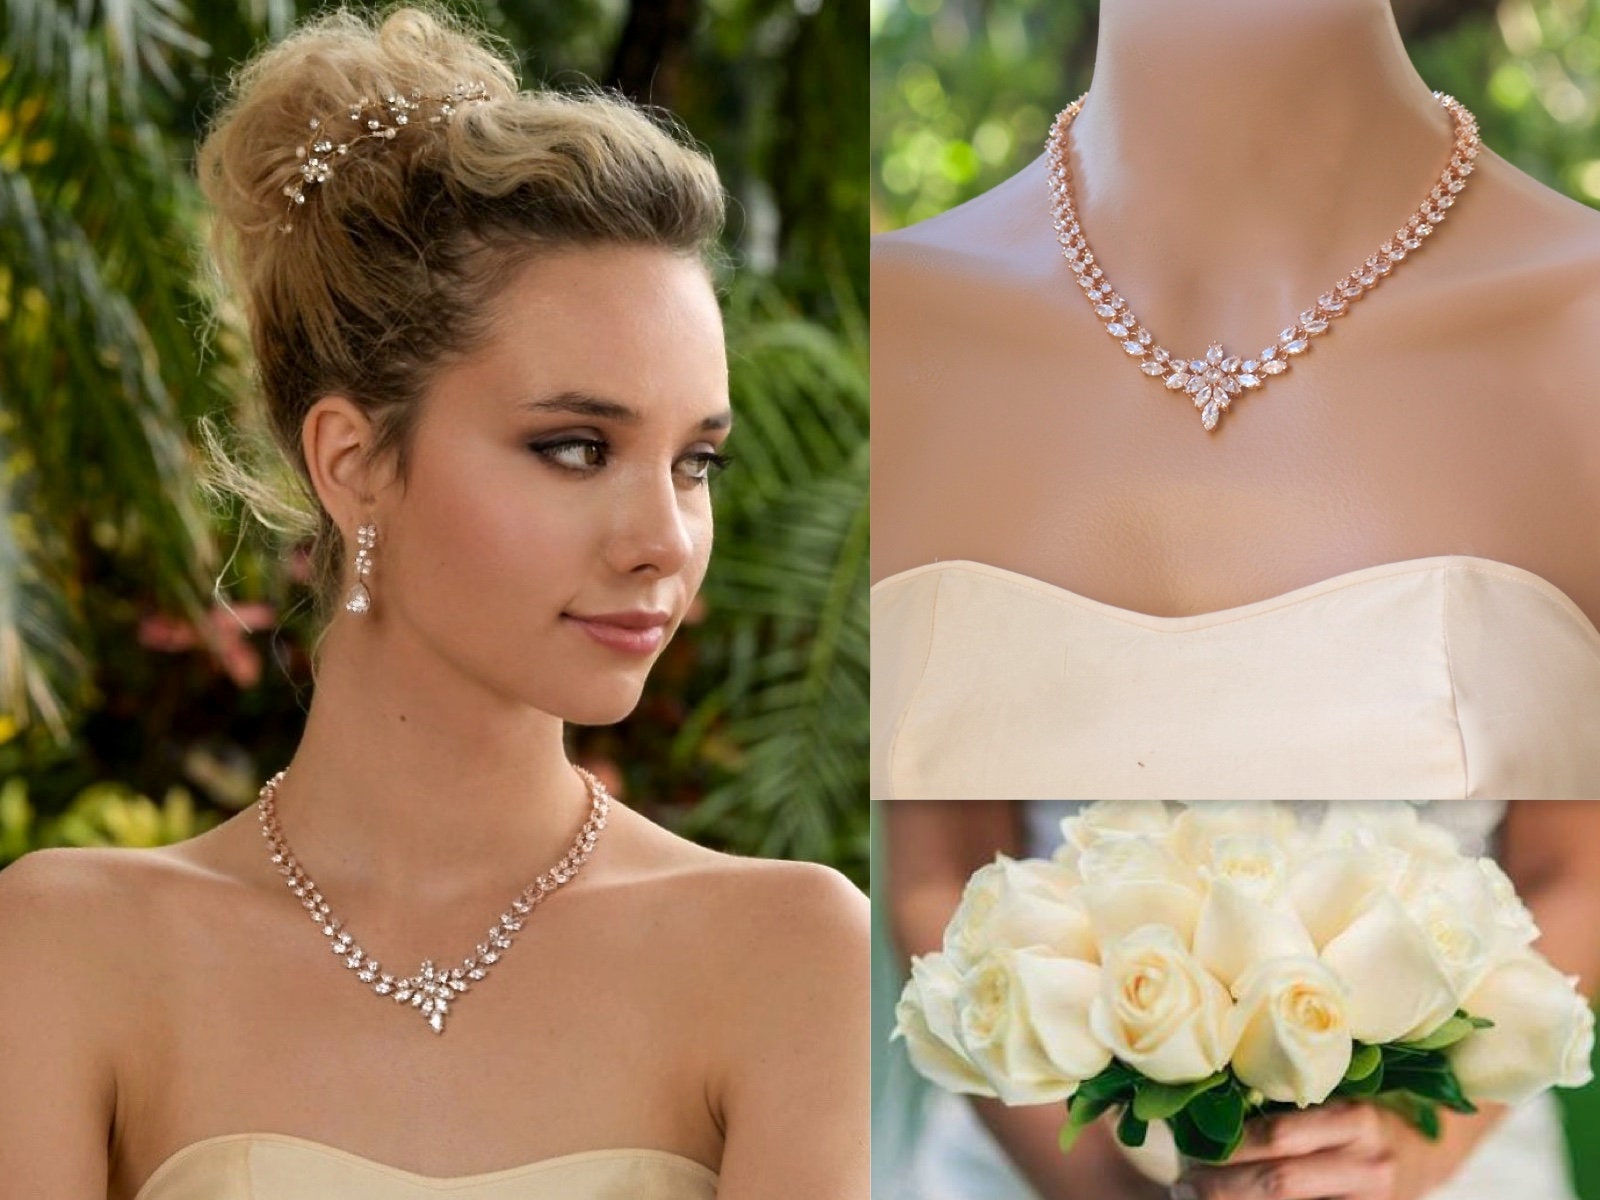 How to Match Jewelry with Different Necklines? – Angel Barocco